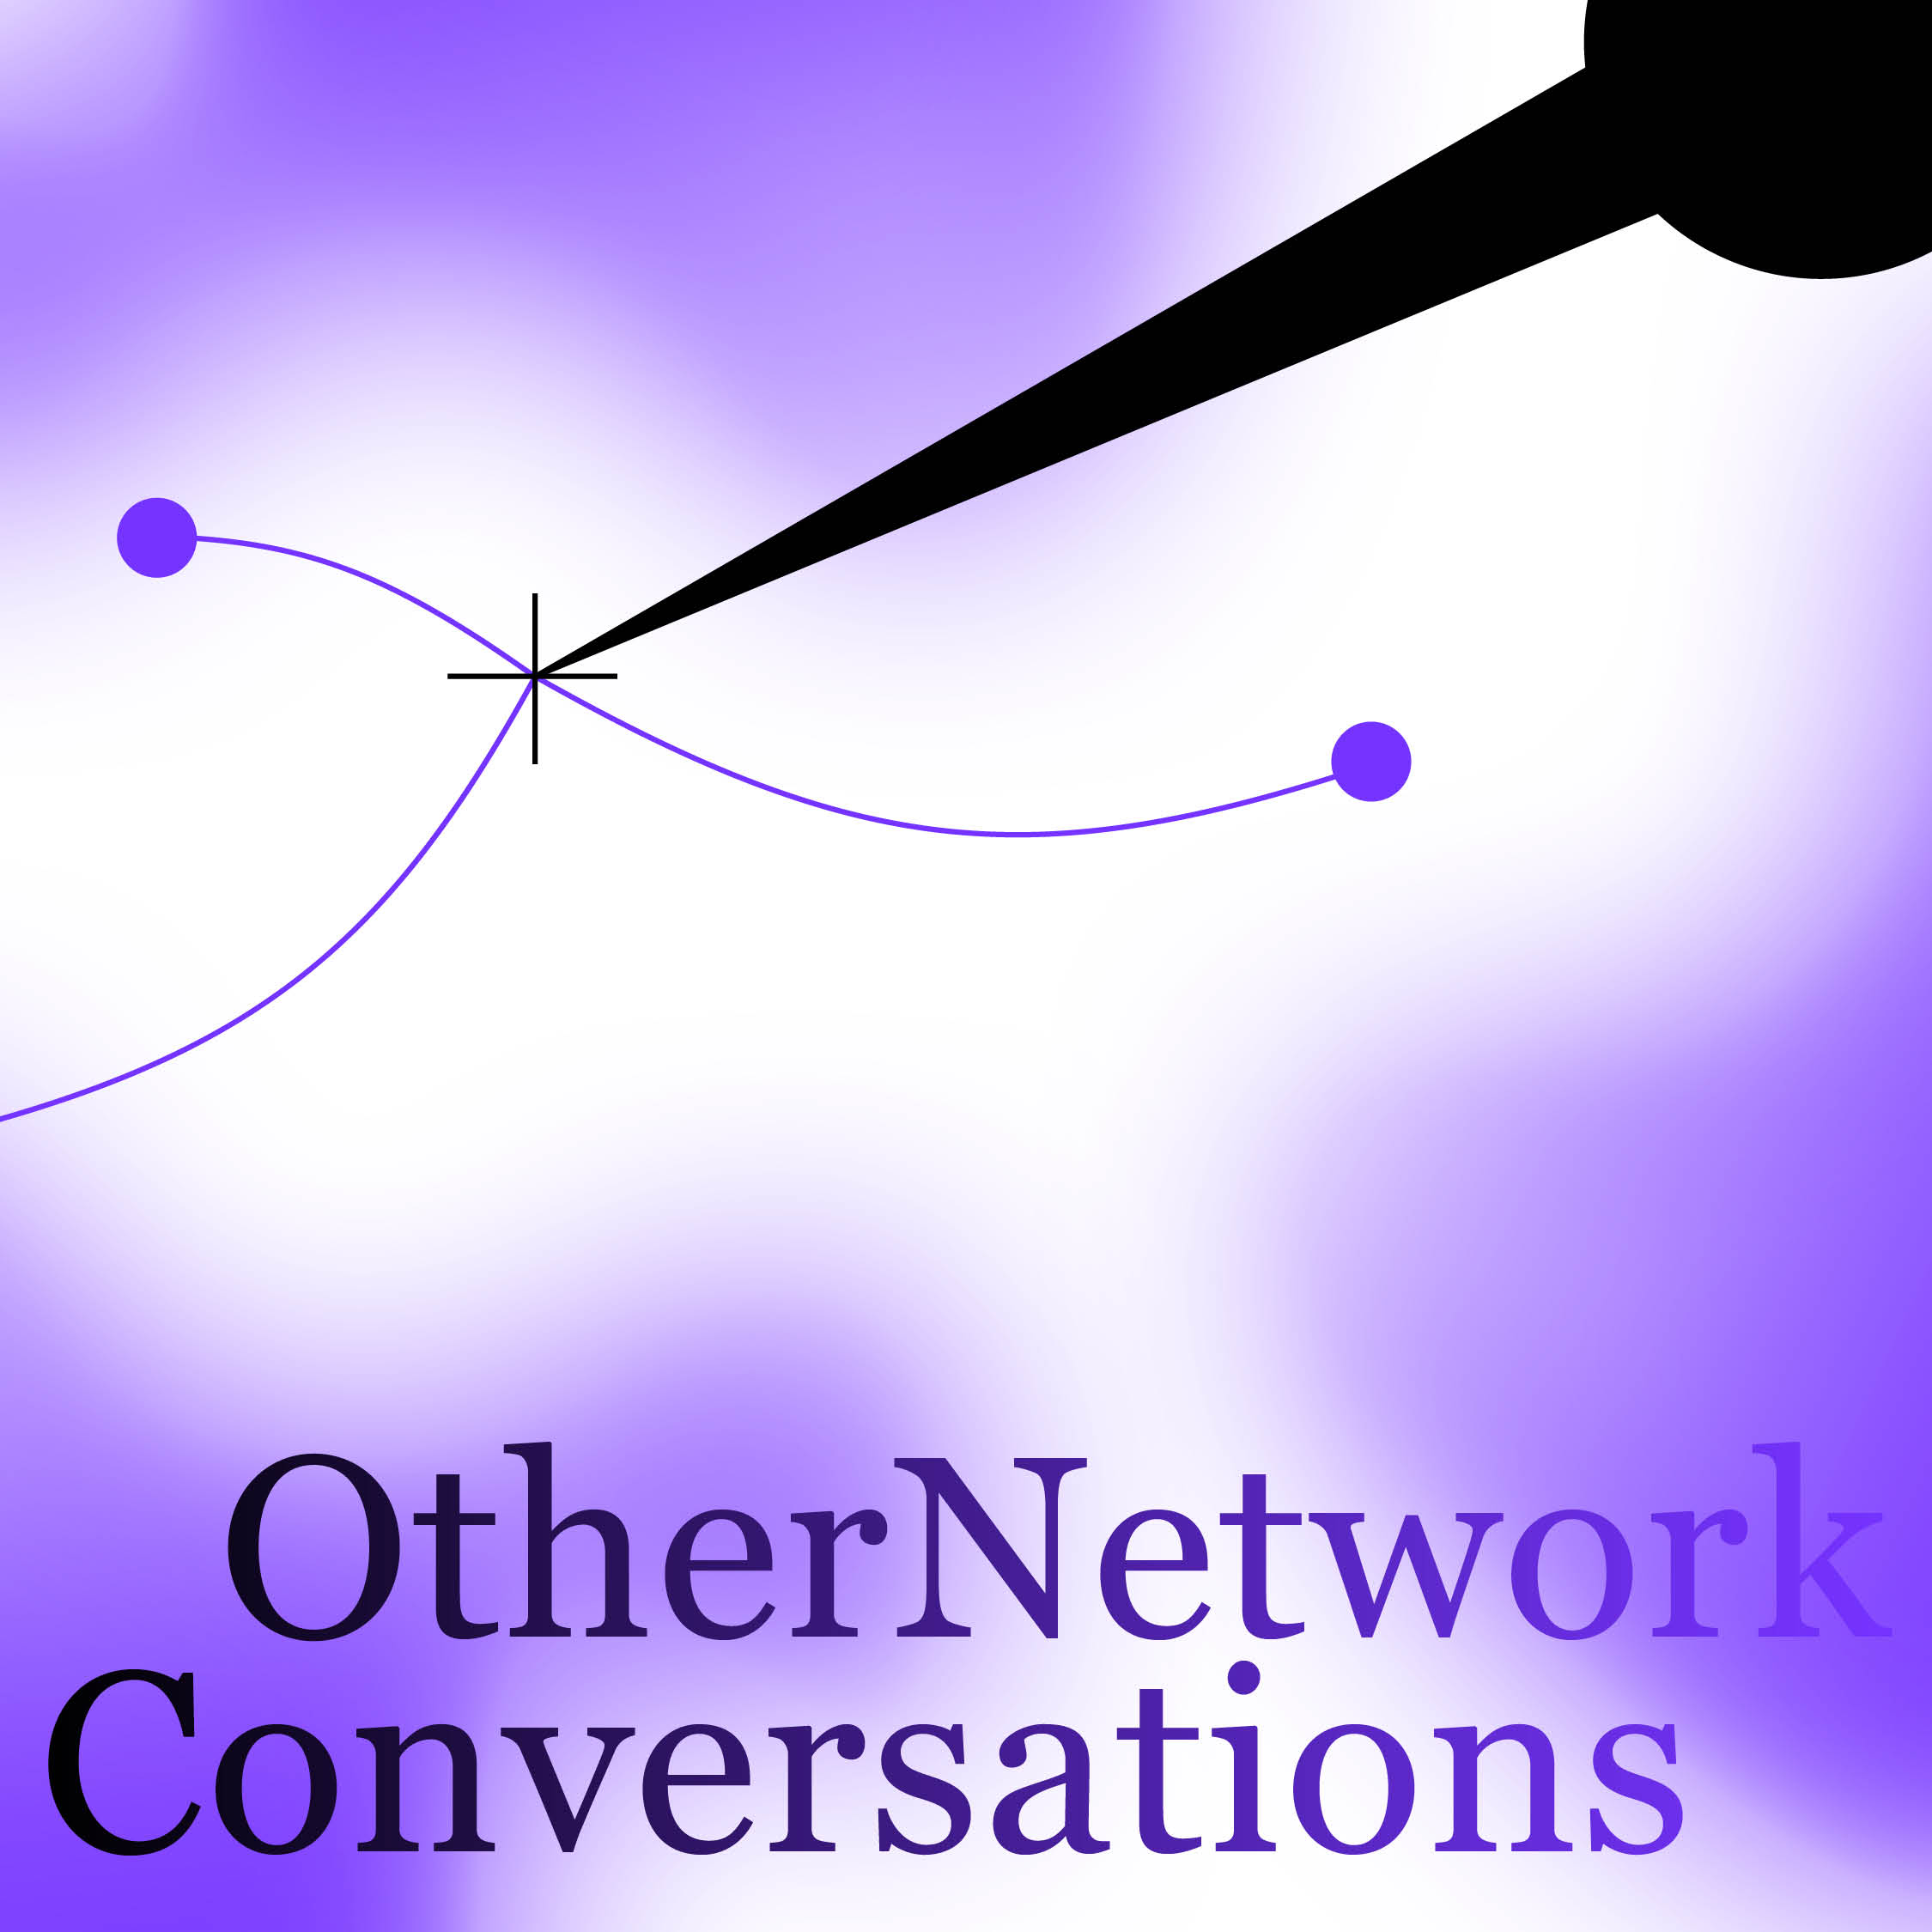 OtherNetwork Conversations